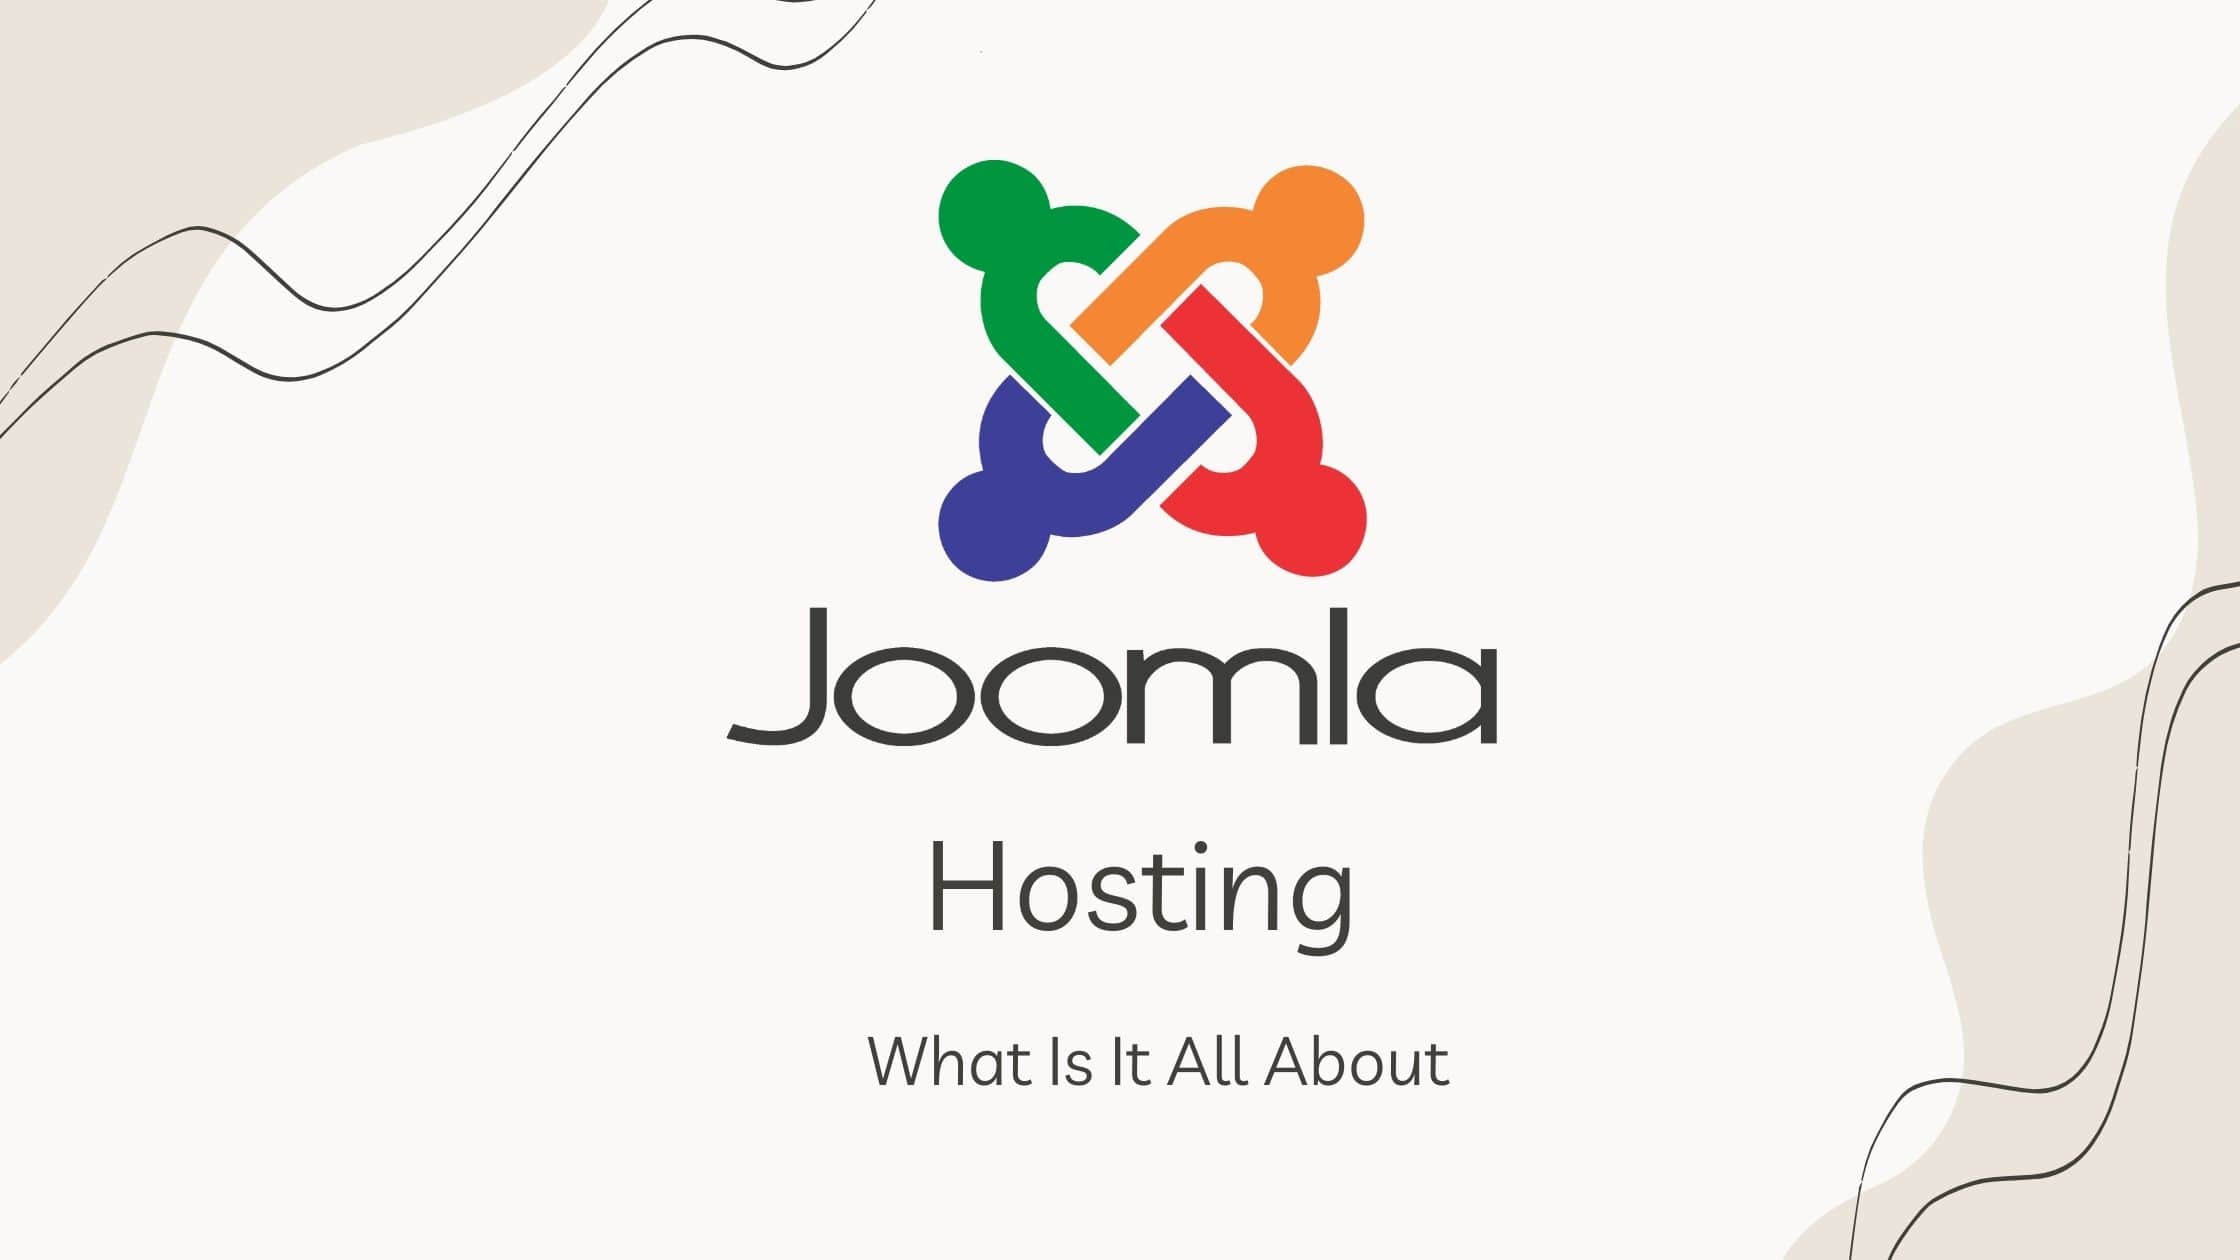 Joomla Hosting. What Is It All About?